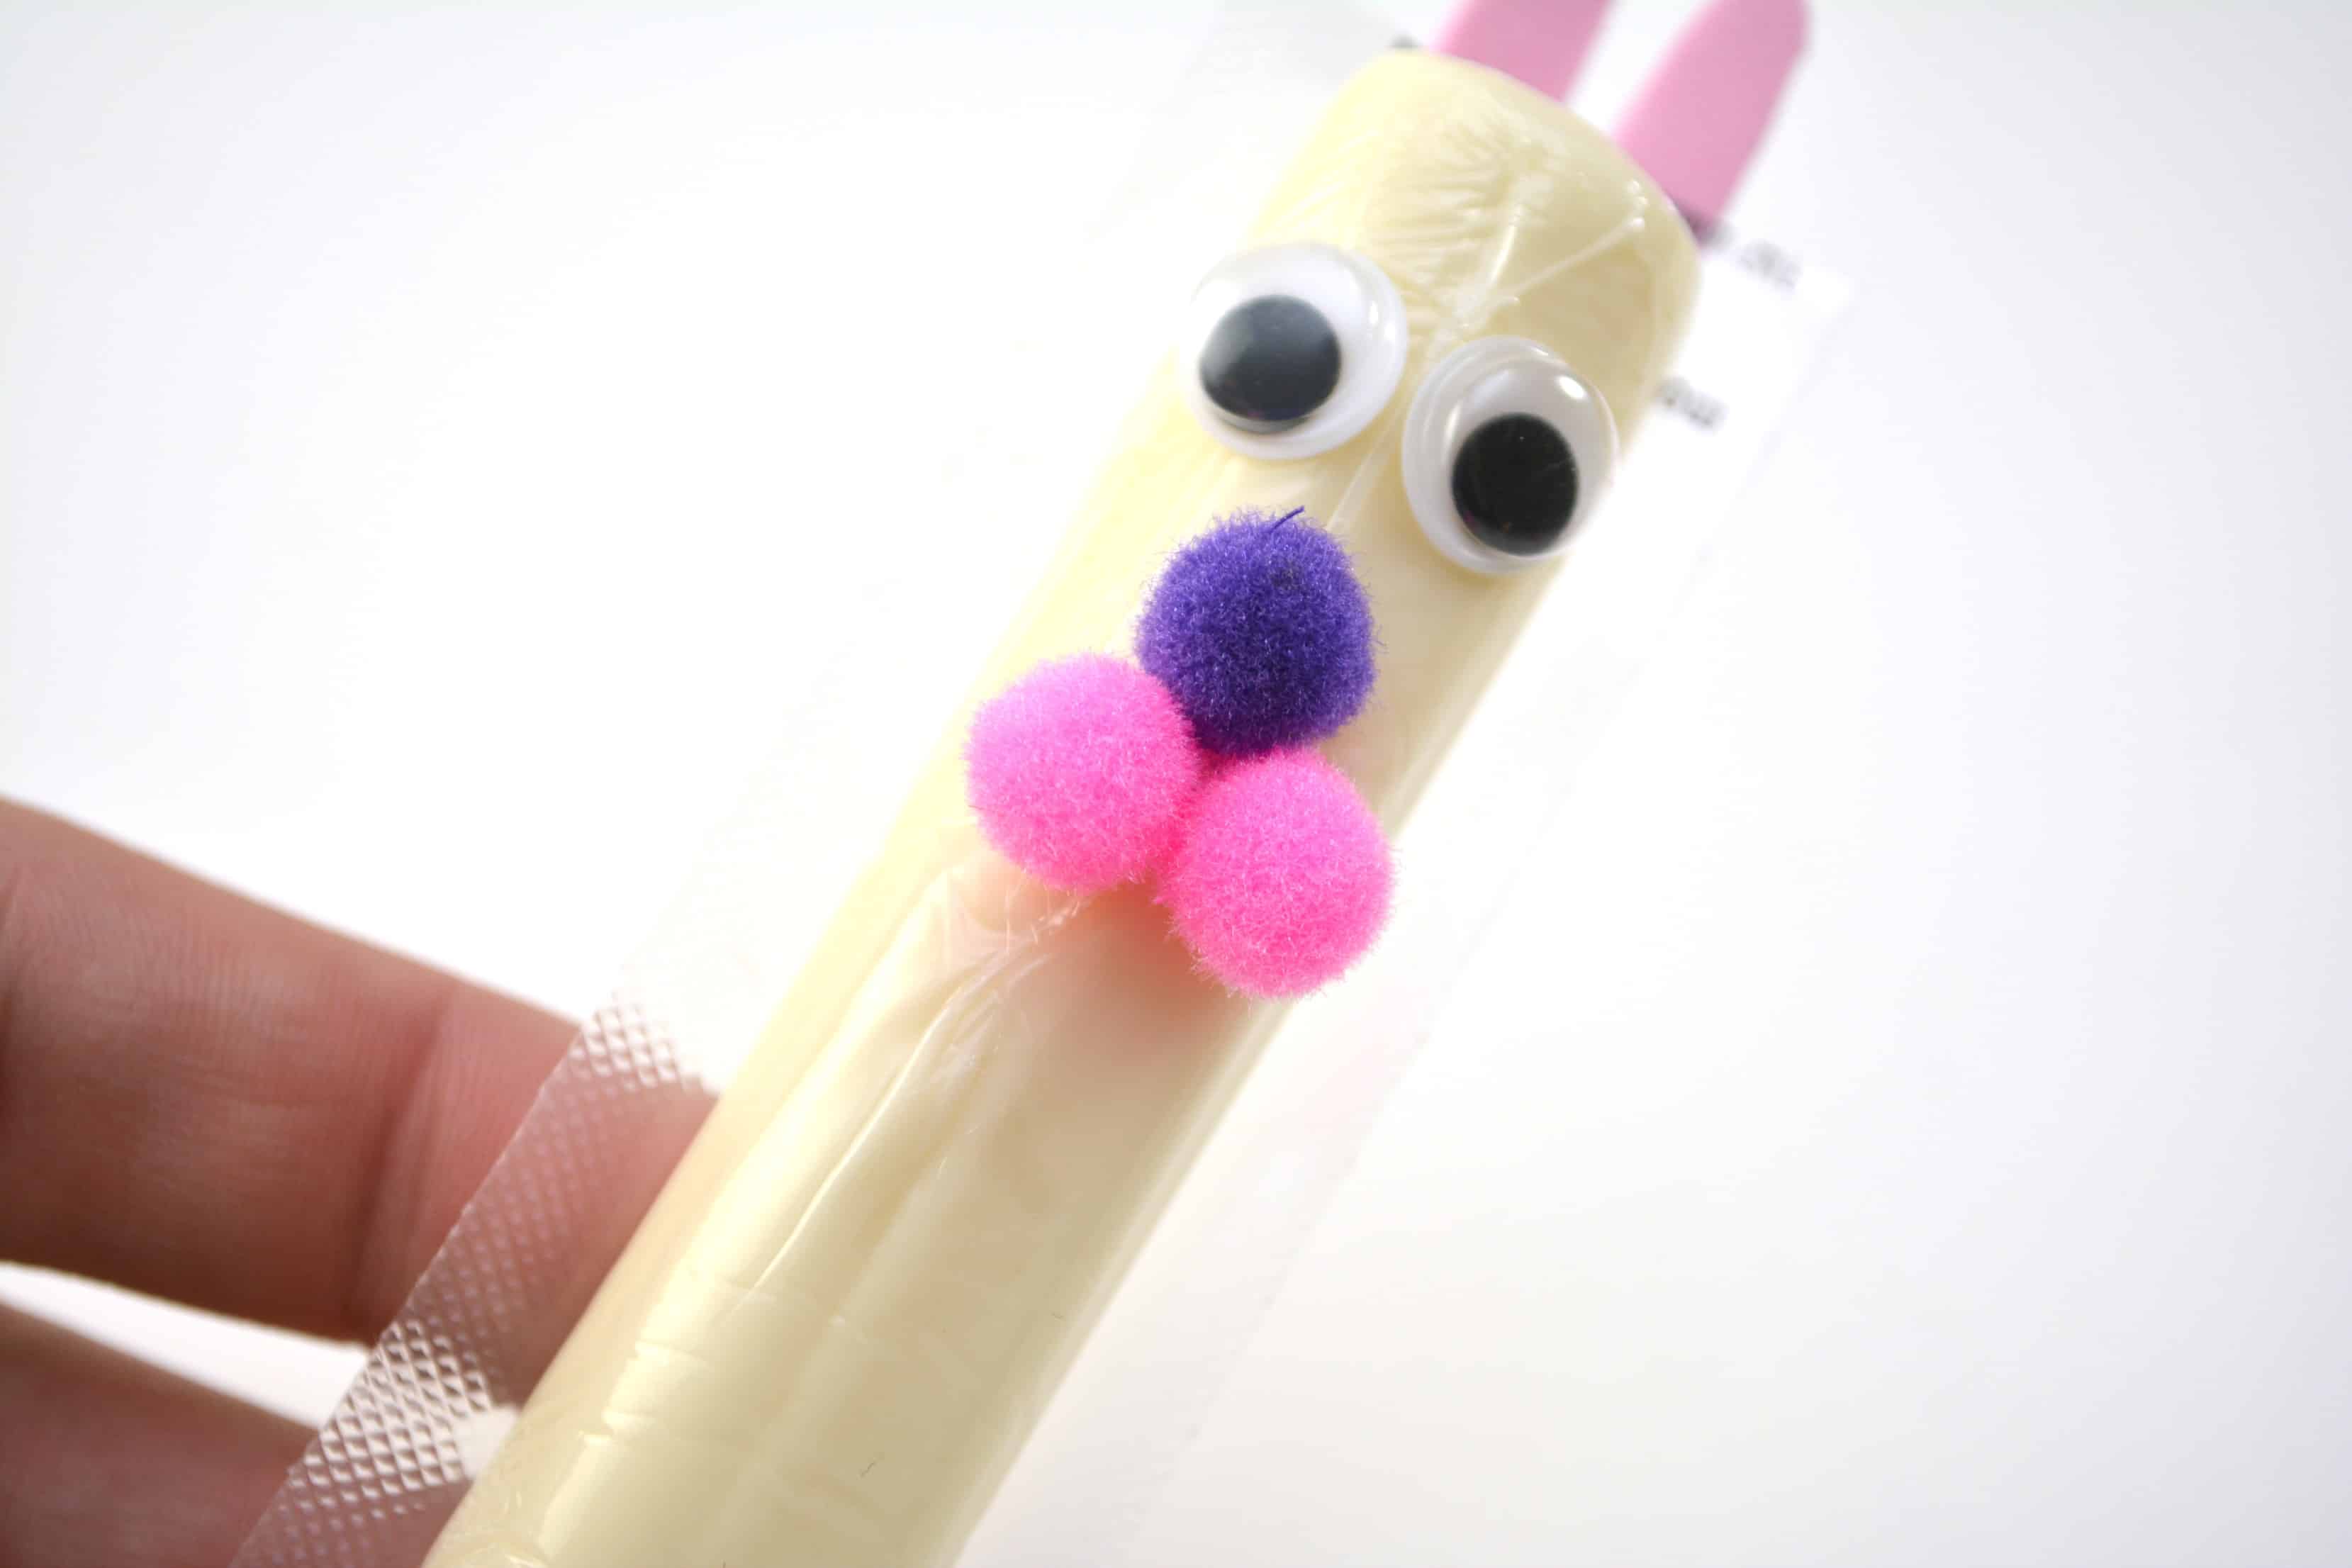 Easter is identical with bunnies and eggs. Today I would like to share Easter Bunny Cheese sticks for your little people's craft activities.